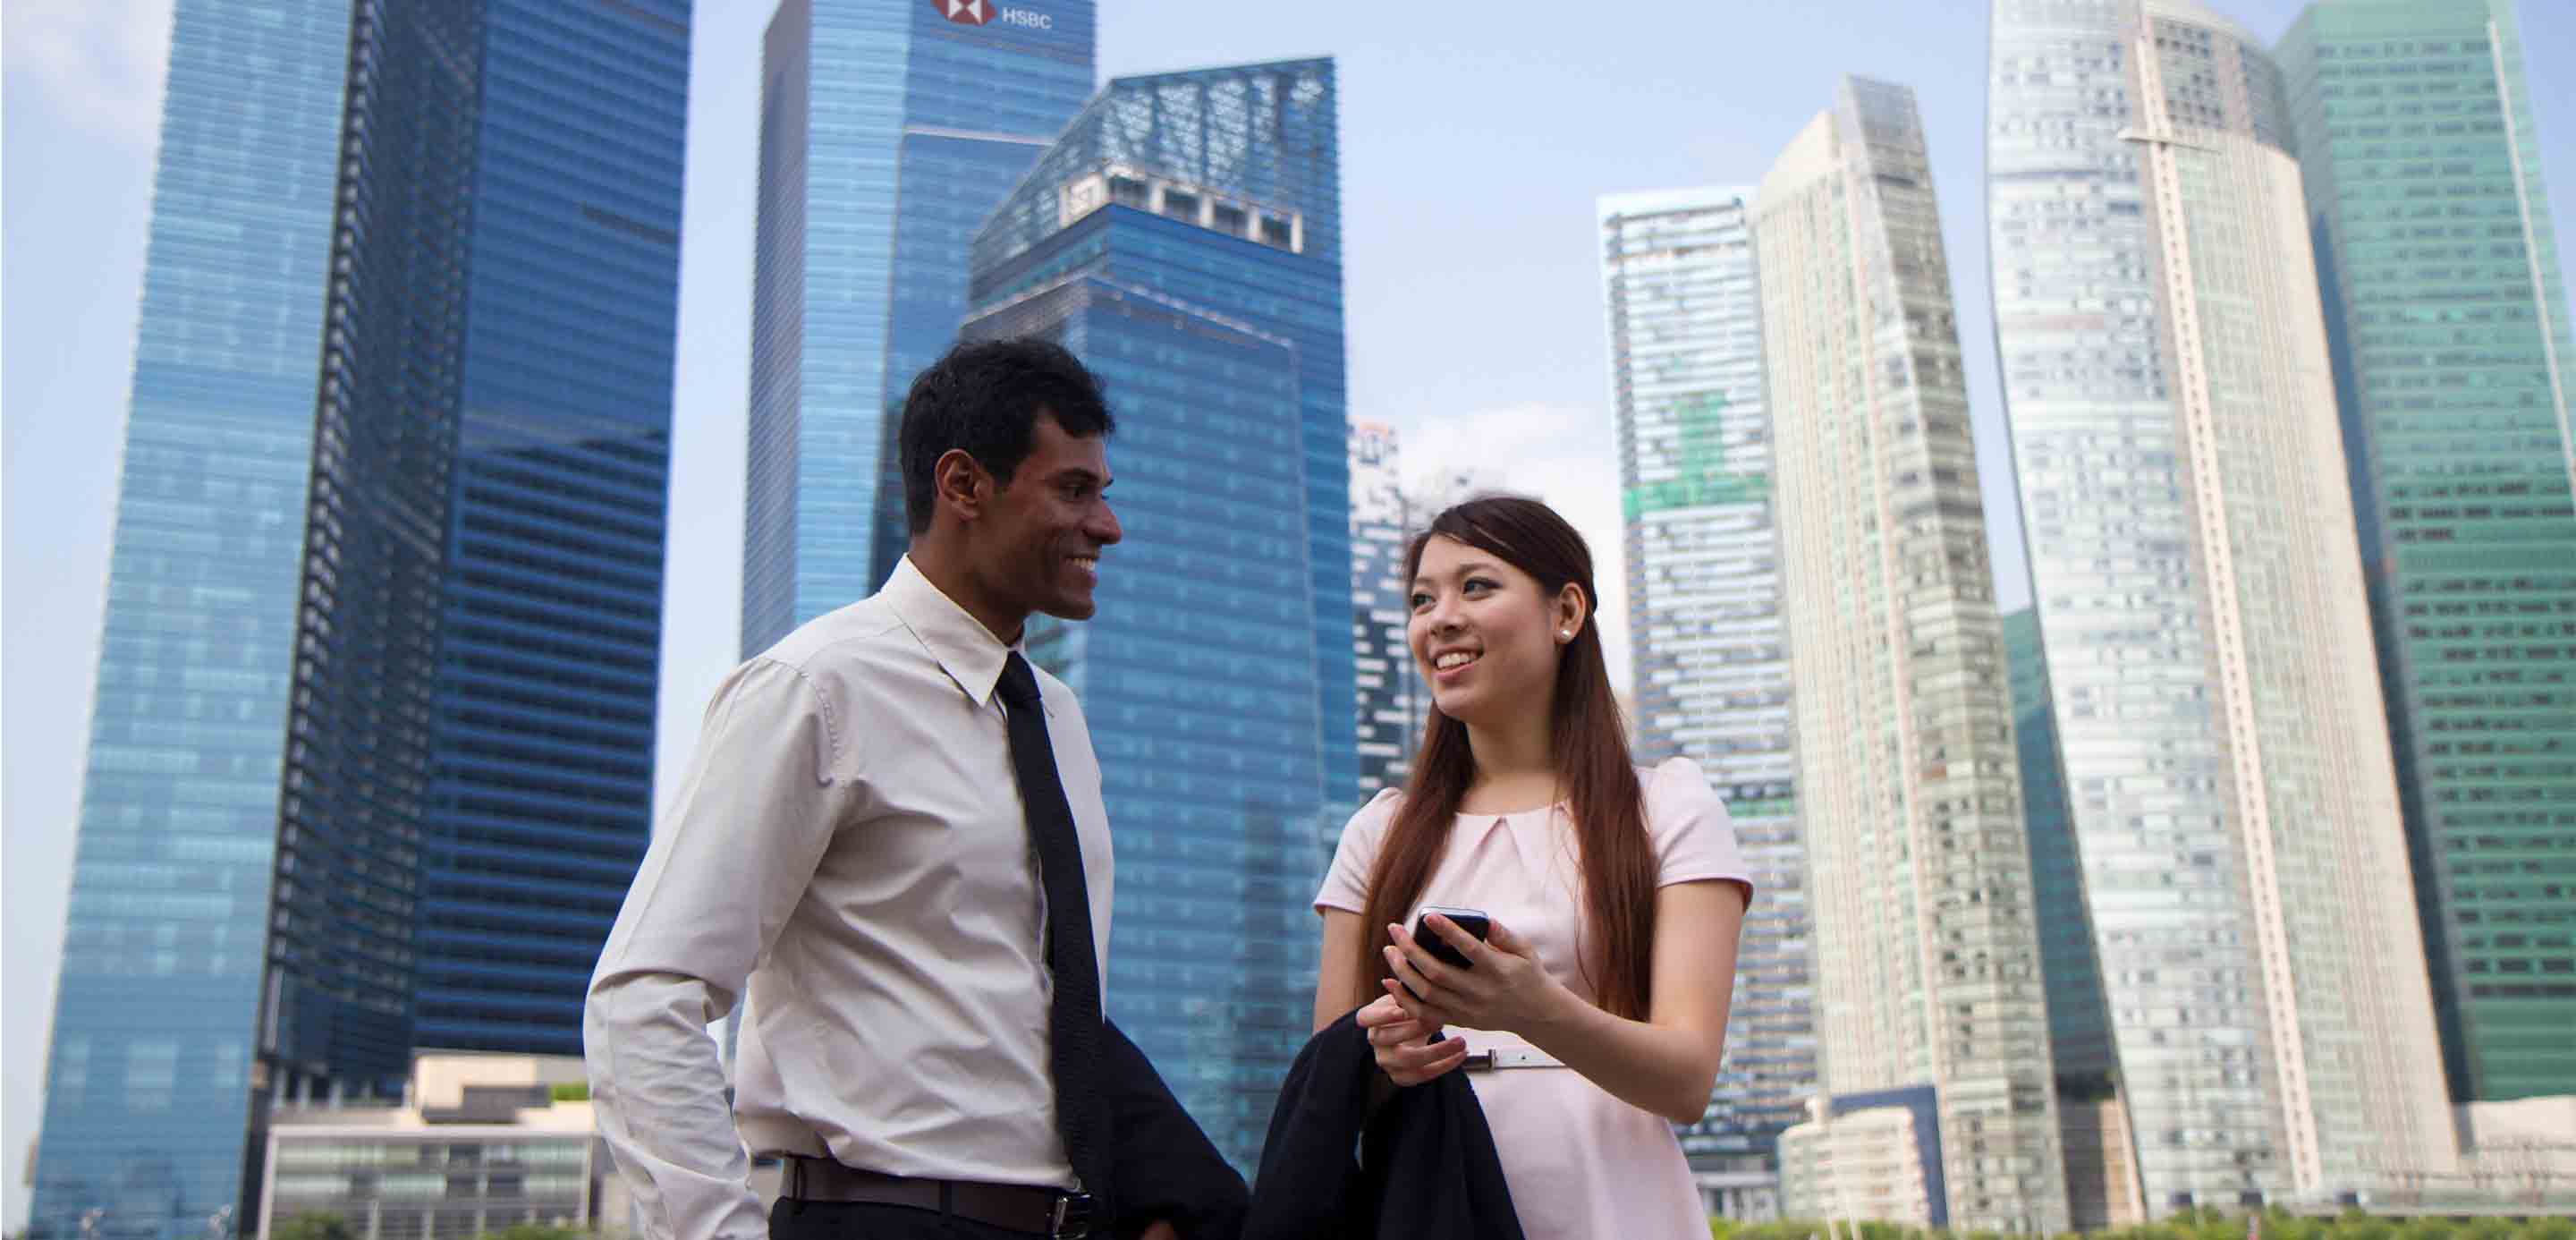 HSBC business insights: How a Singapore hub can help companies seize opportunities in Asia